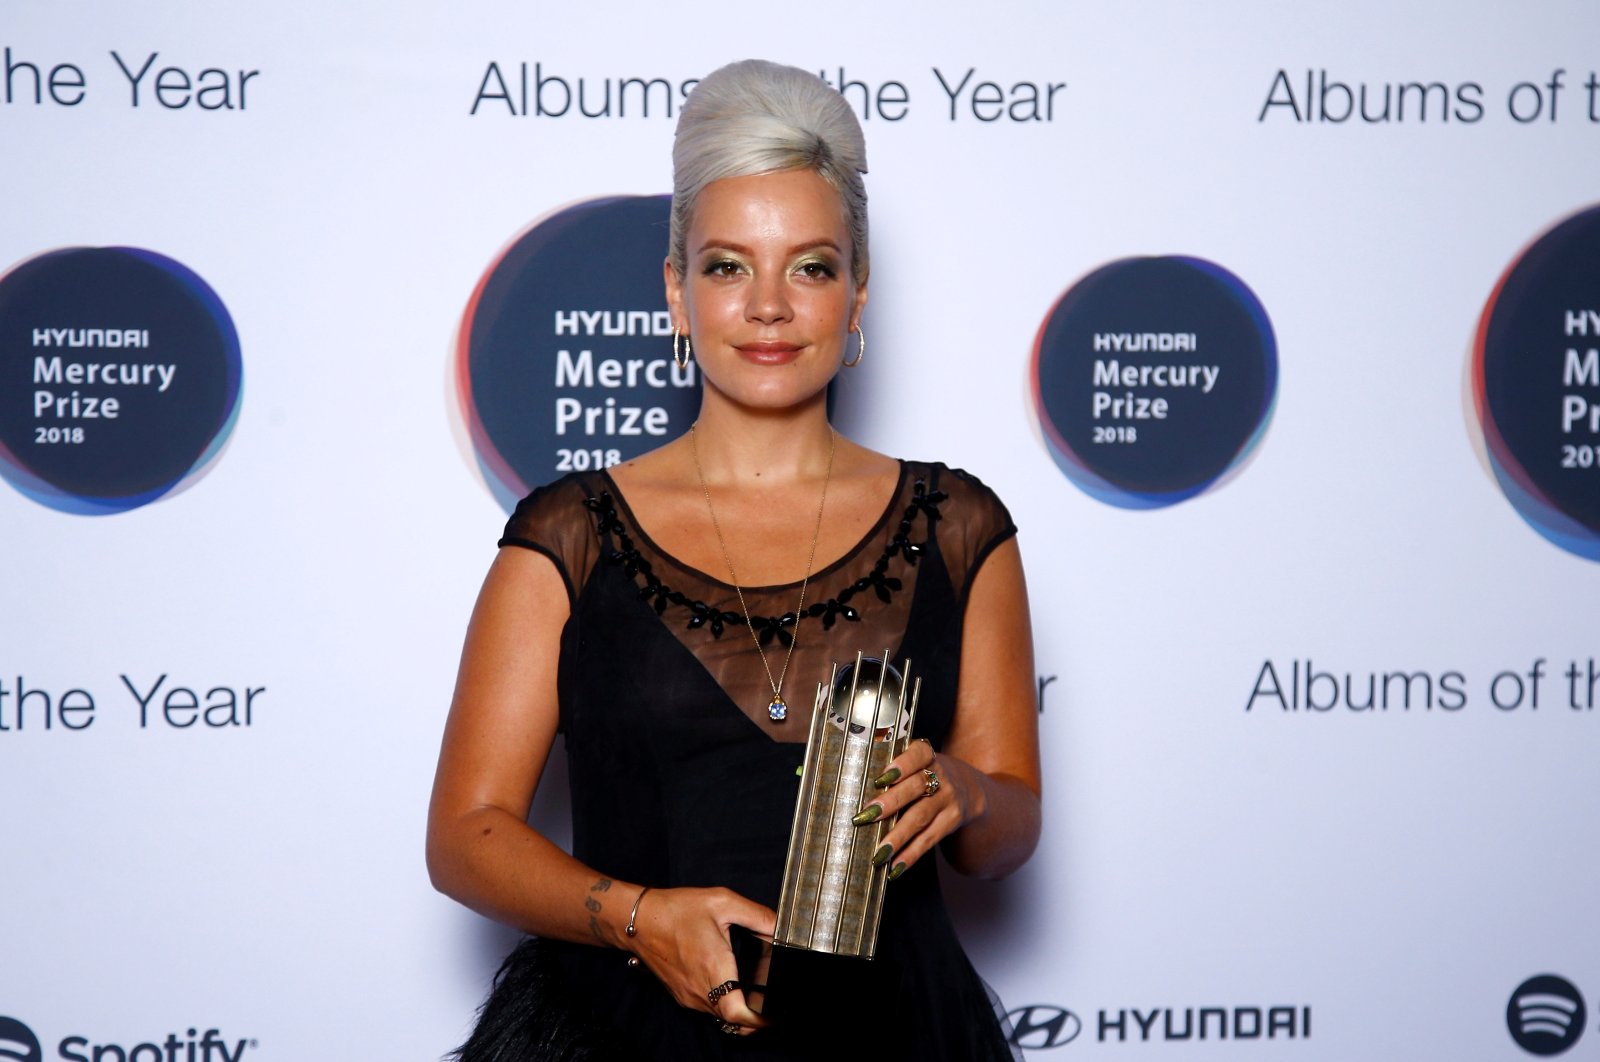 Lily Allen, whose album "No Shame" was nominated for the Mercury Prize 2018, poses for a photograph ahead of the ceremony at the Hammersmith Apollo in London, Britain, Sept. 20, 2018. (REUTERS Photo)